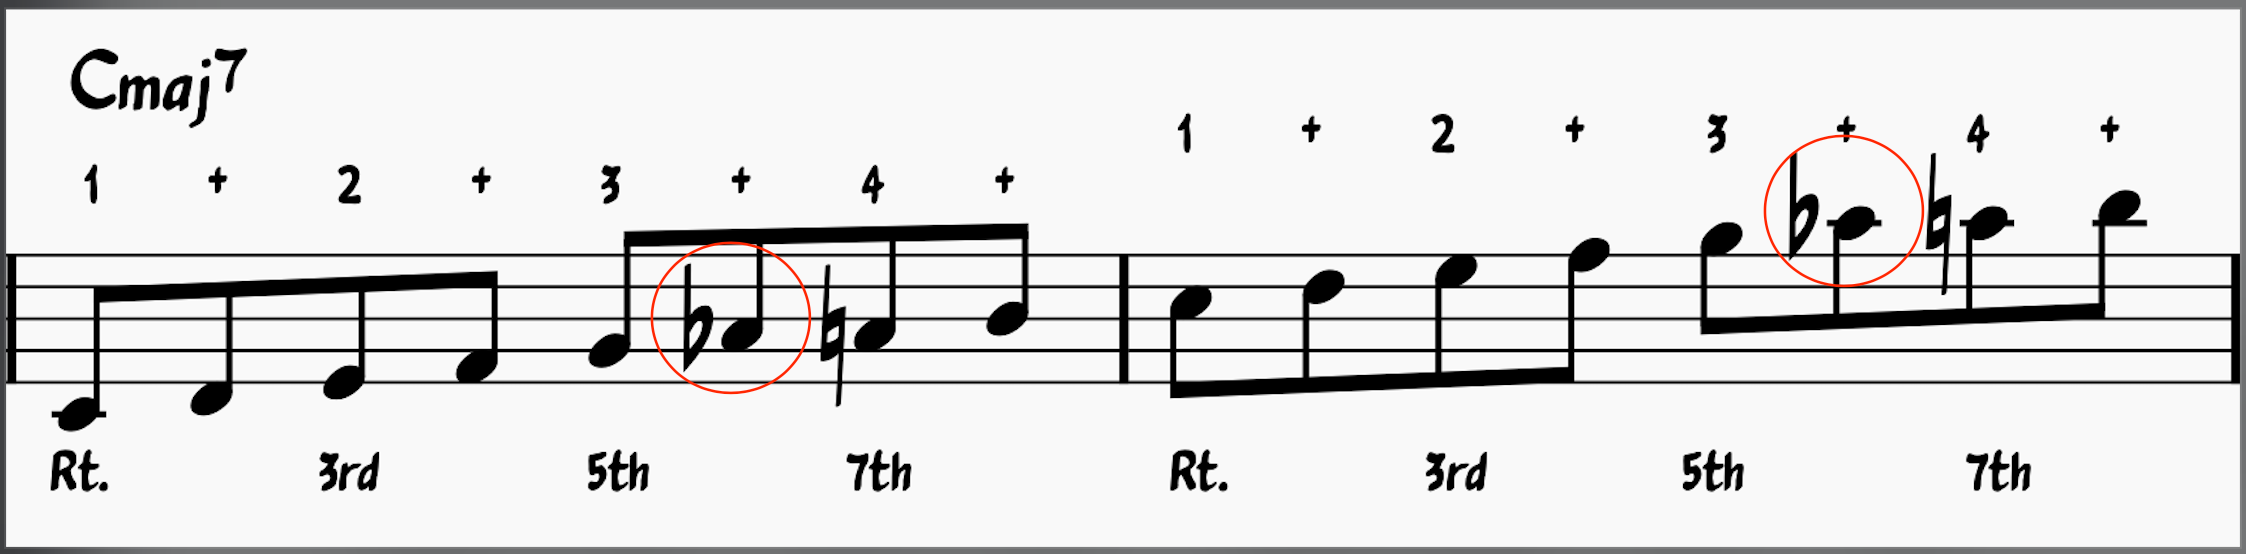 Eight-note scales keep chord tones on strong beats in the second measure